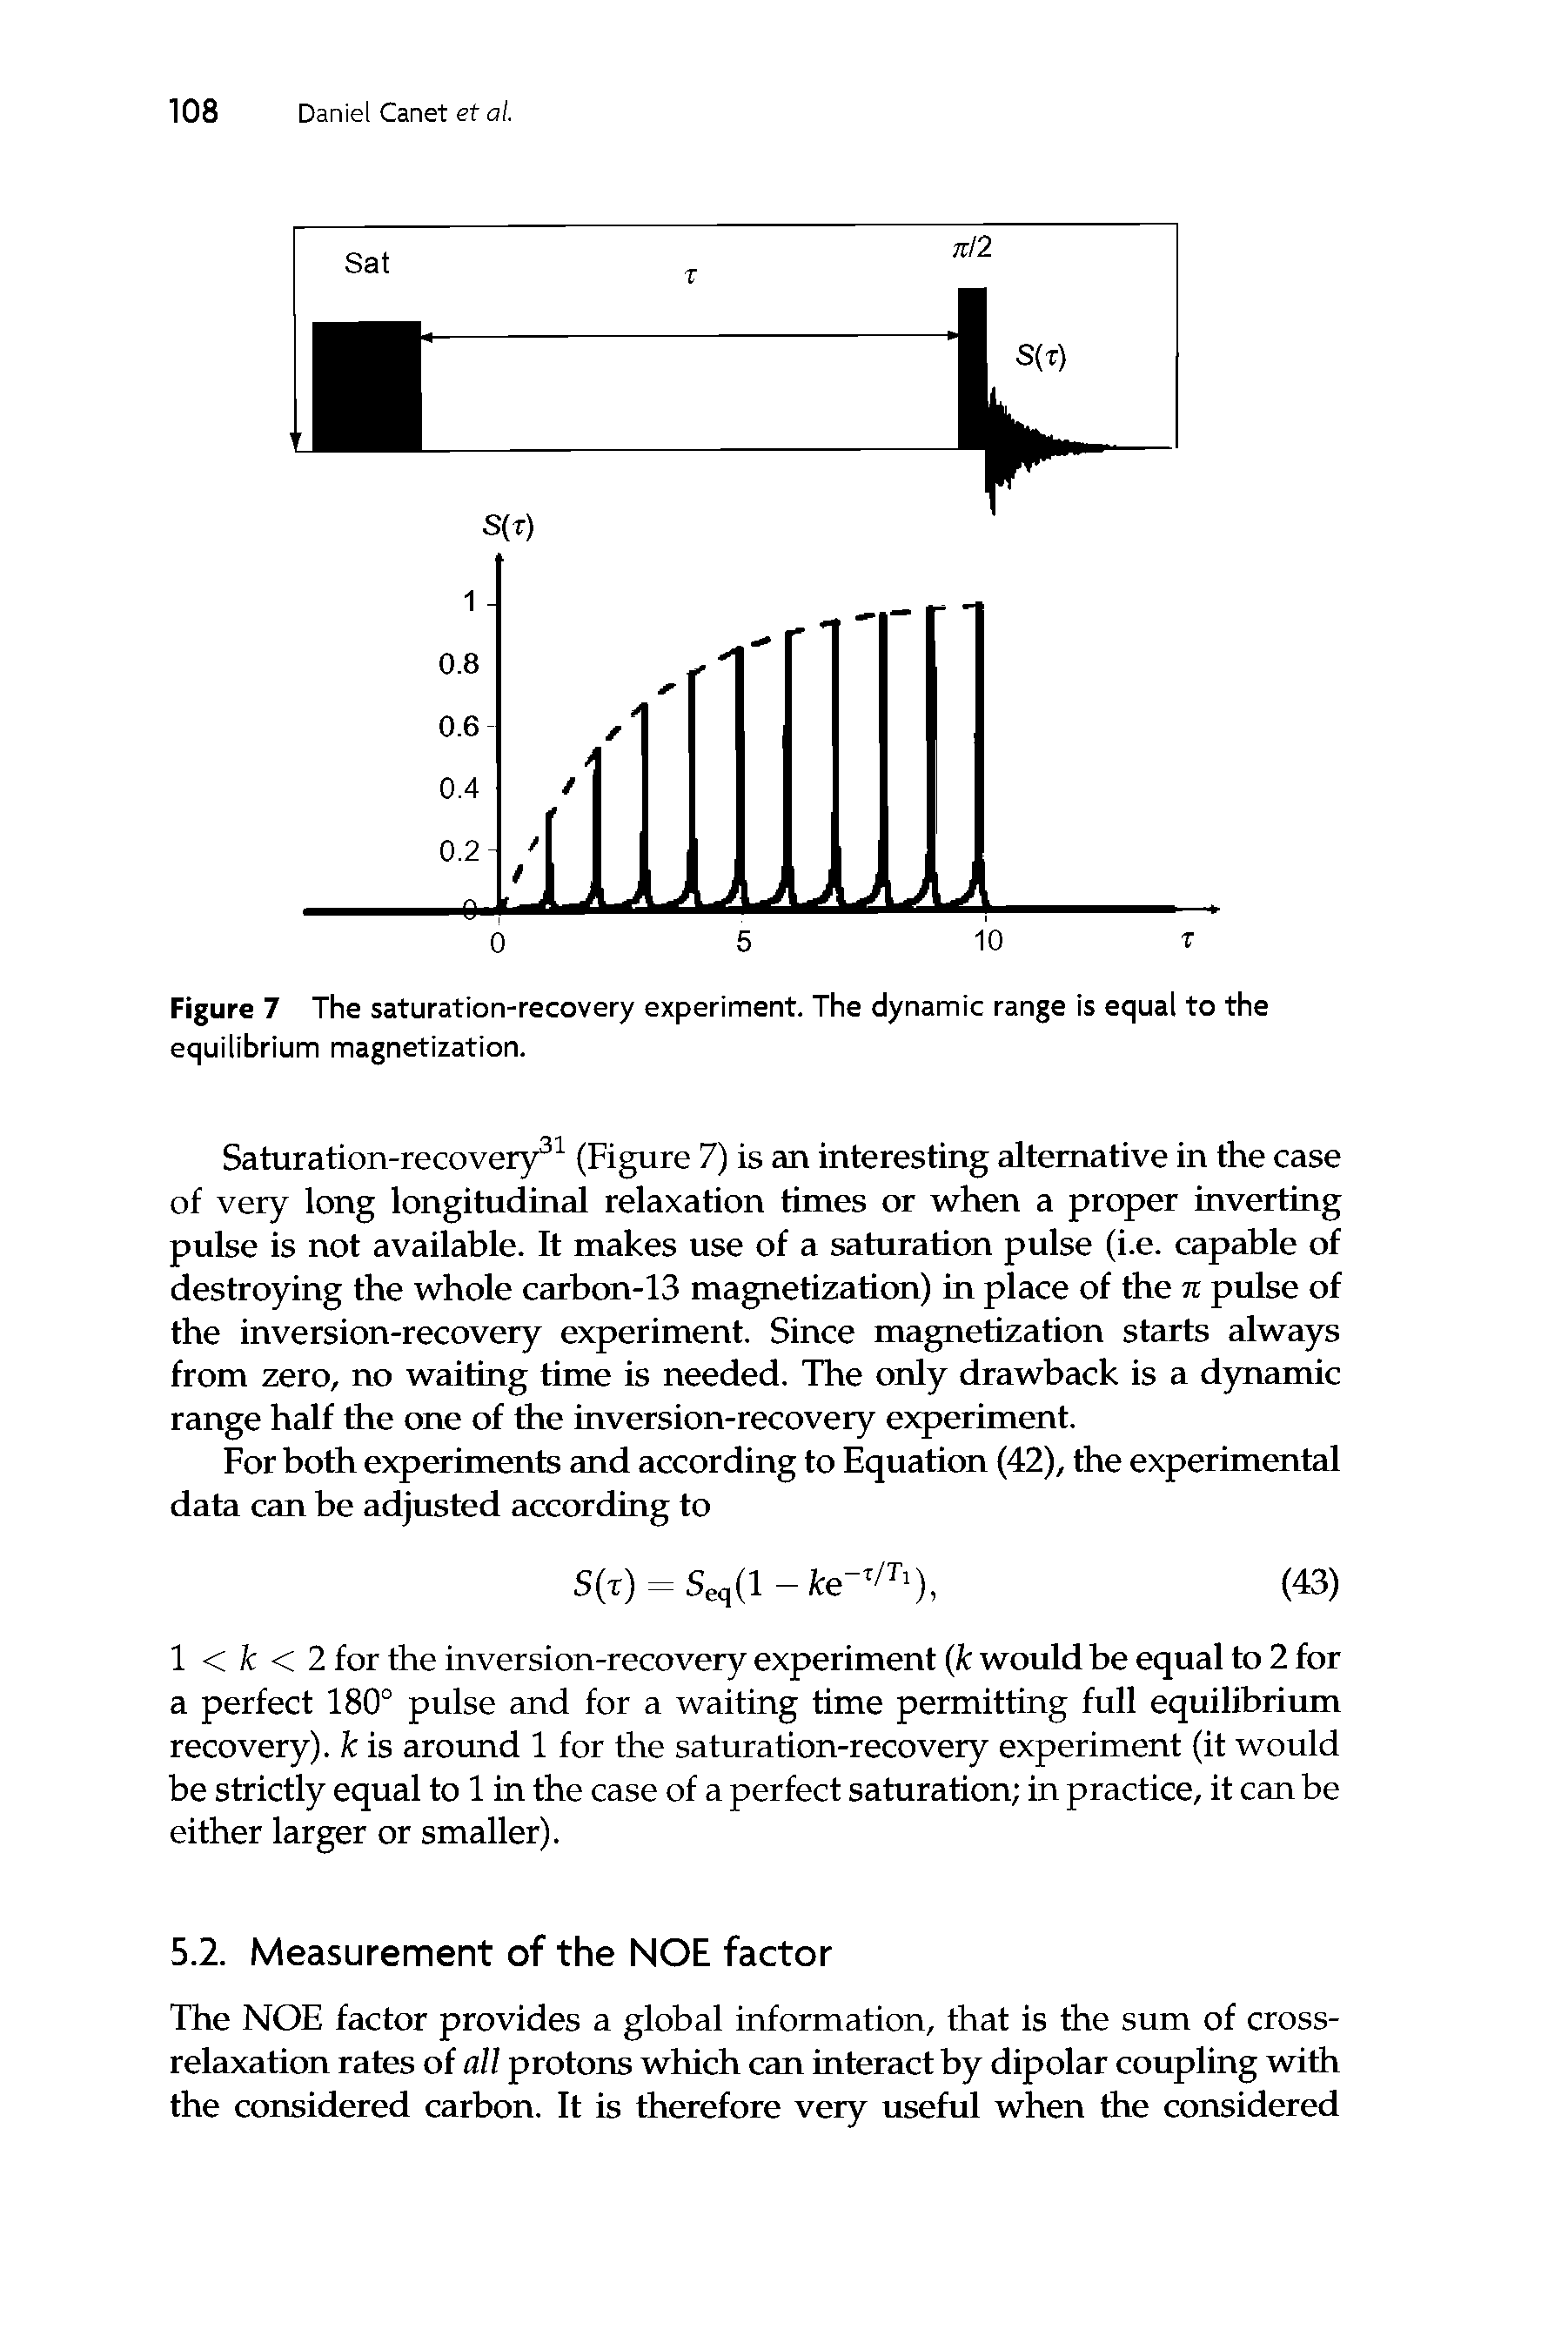 Figure 7 The saturation-recovery experiment. The dynamic range is equal to the equilibrium magnetization.